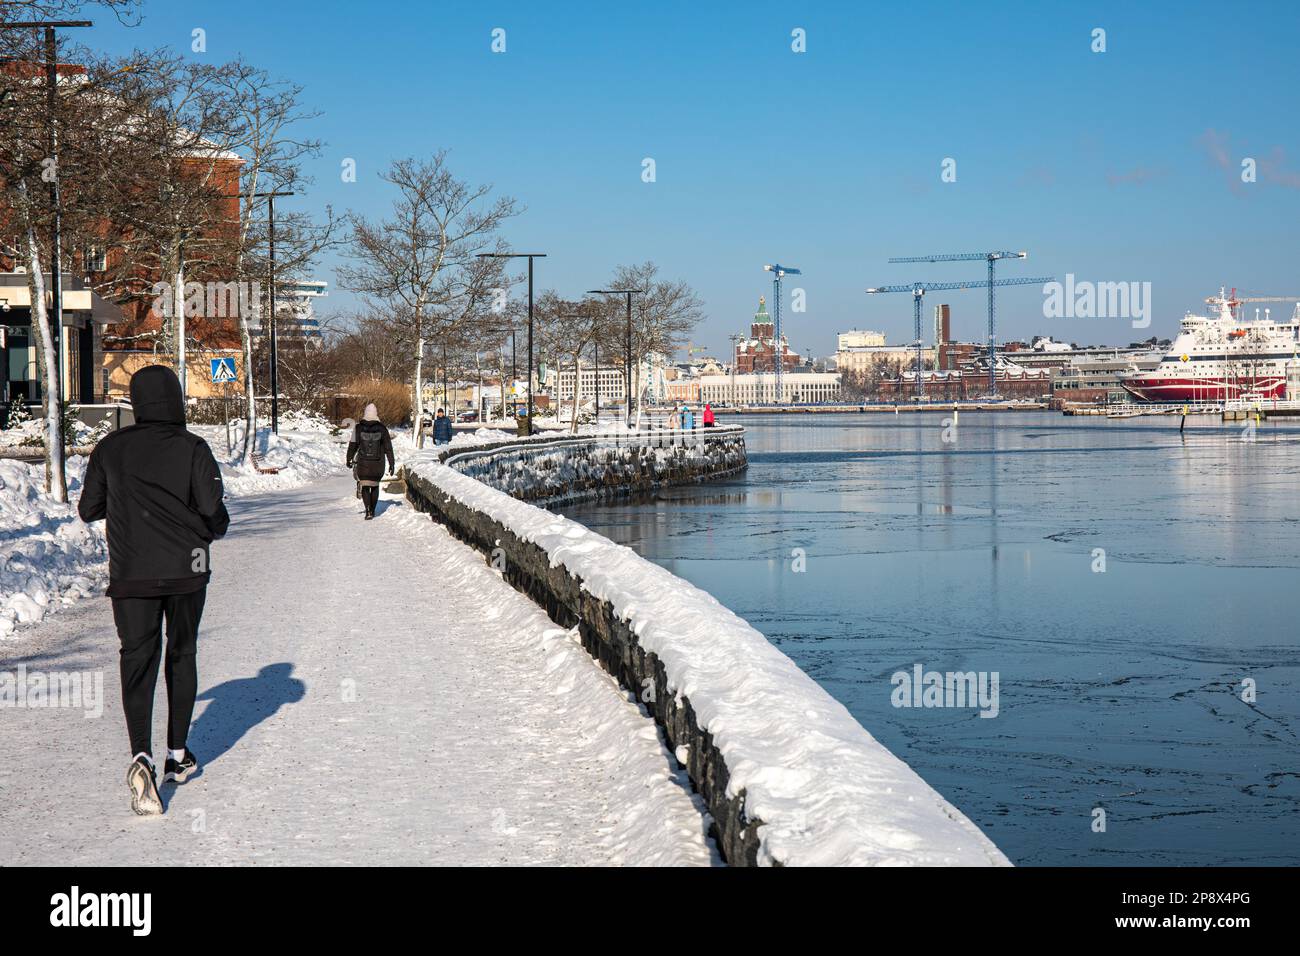 People jogging and walking on Kaivopuisto promenade on a sunny winter day in Helsinki, Finland Stock Photo